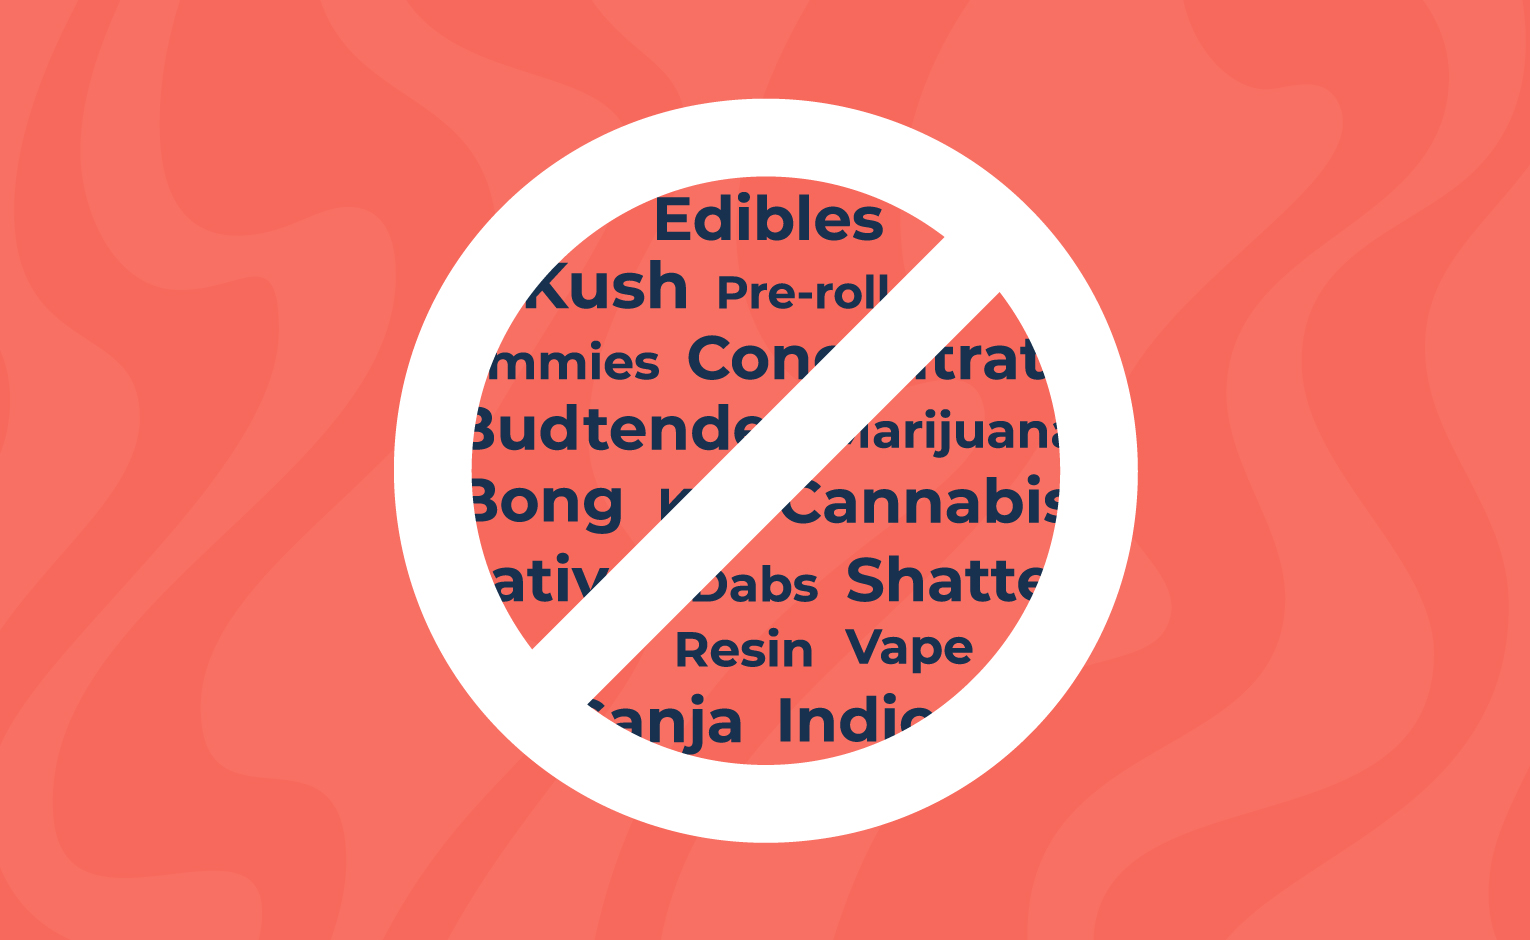 Dispensary advertising can be tricky with the banned words prohibited by text message marketing carriers. Find out how you can get around them.